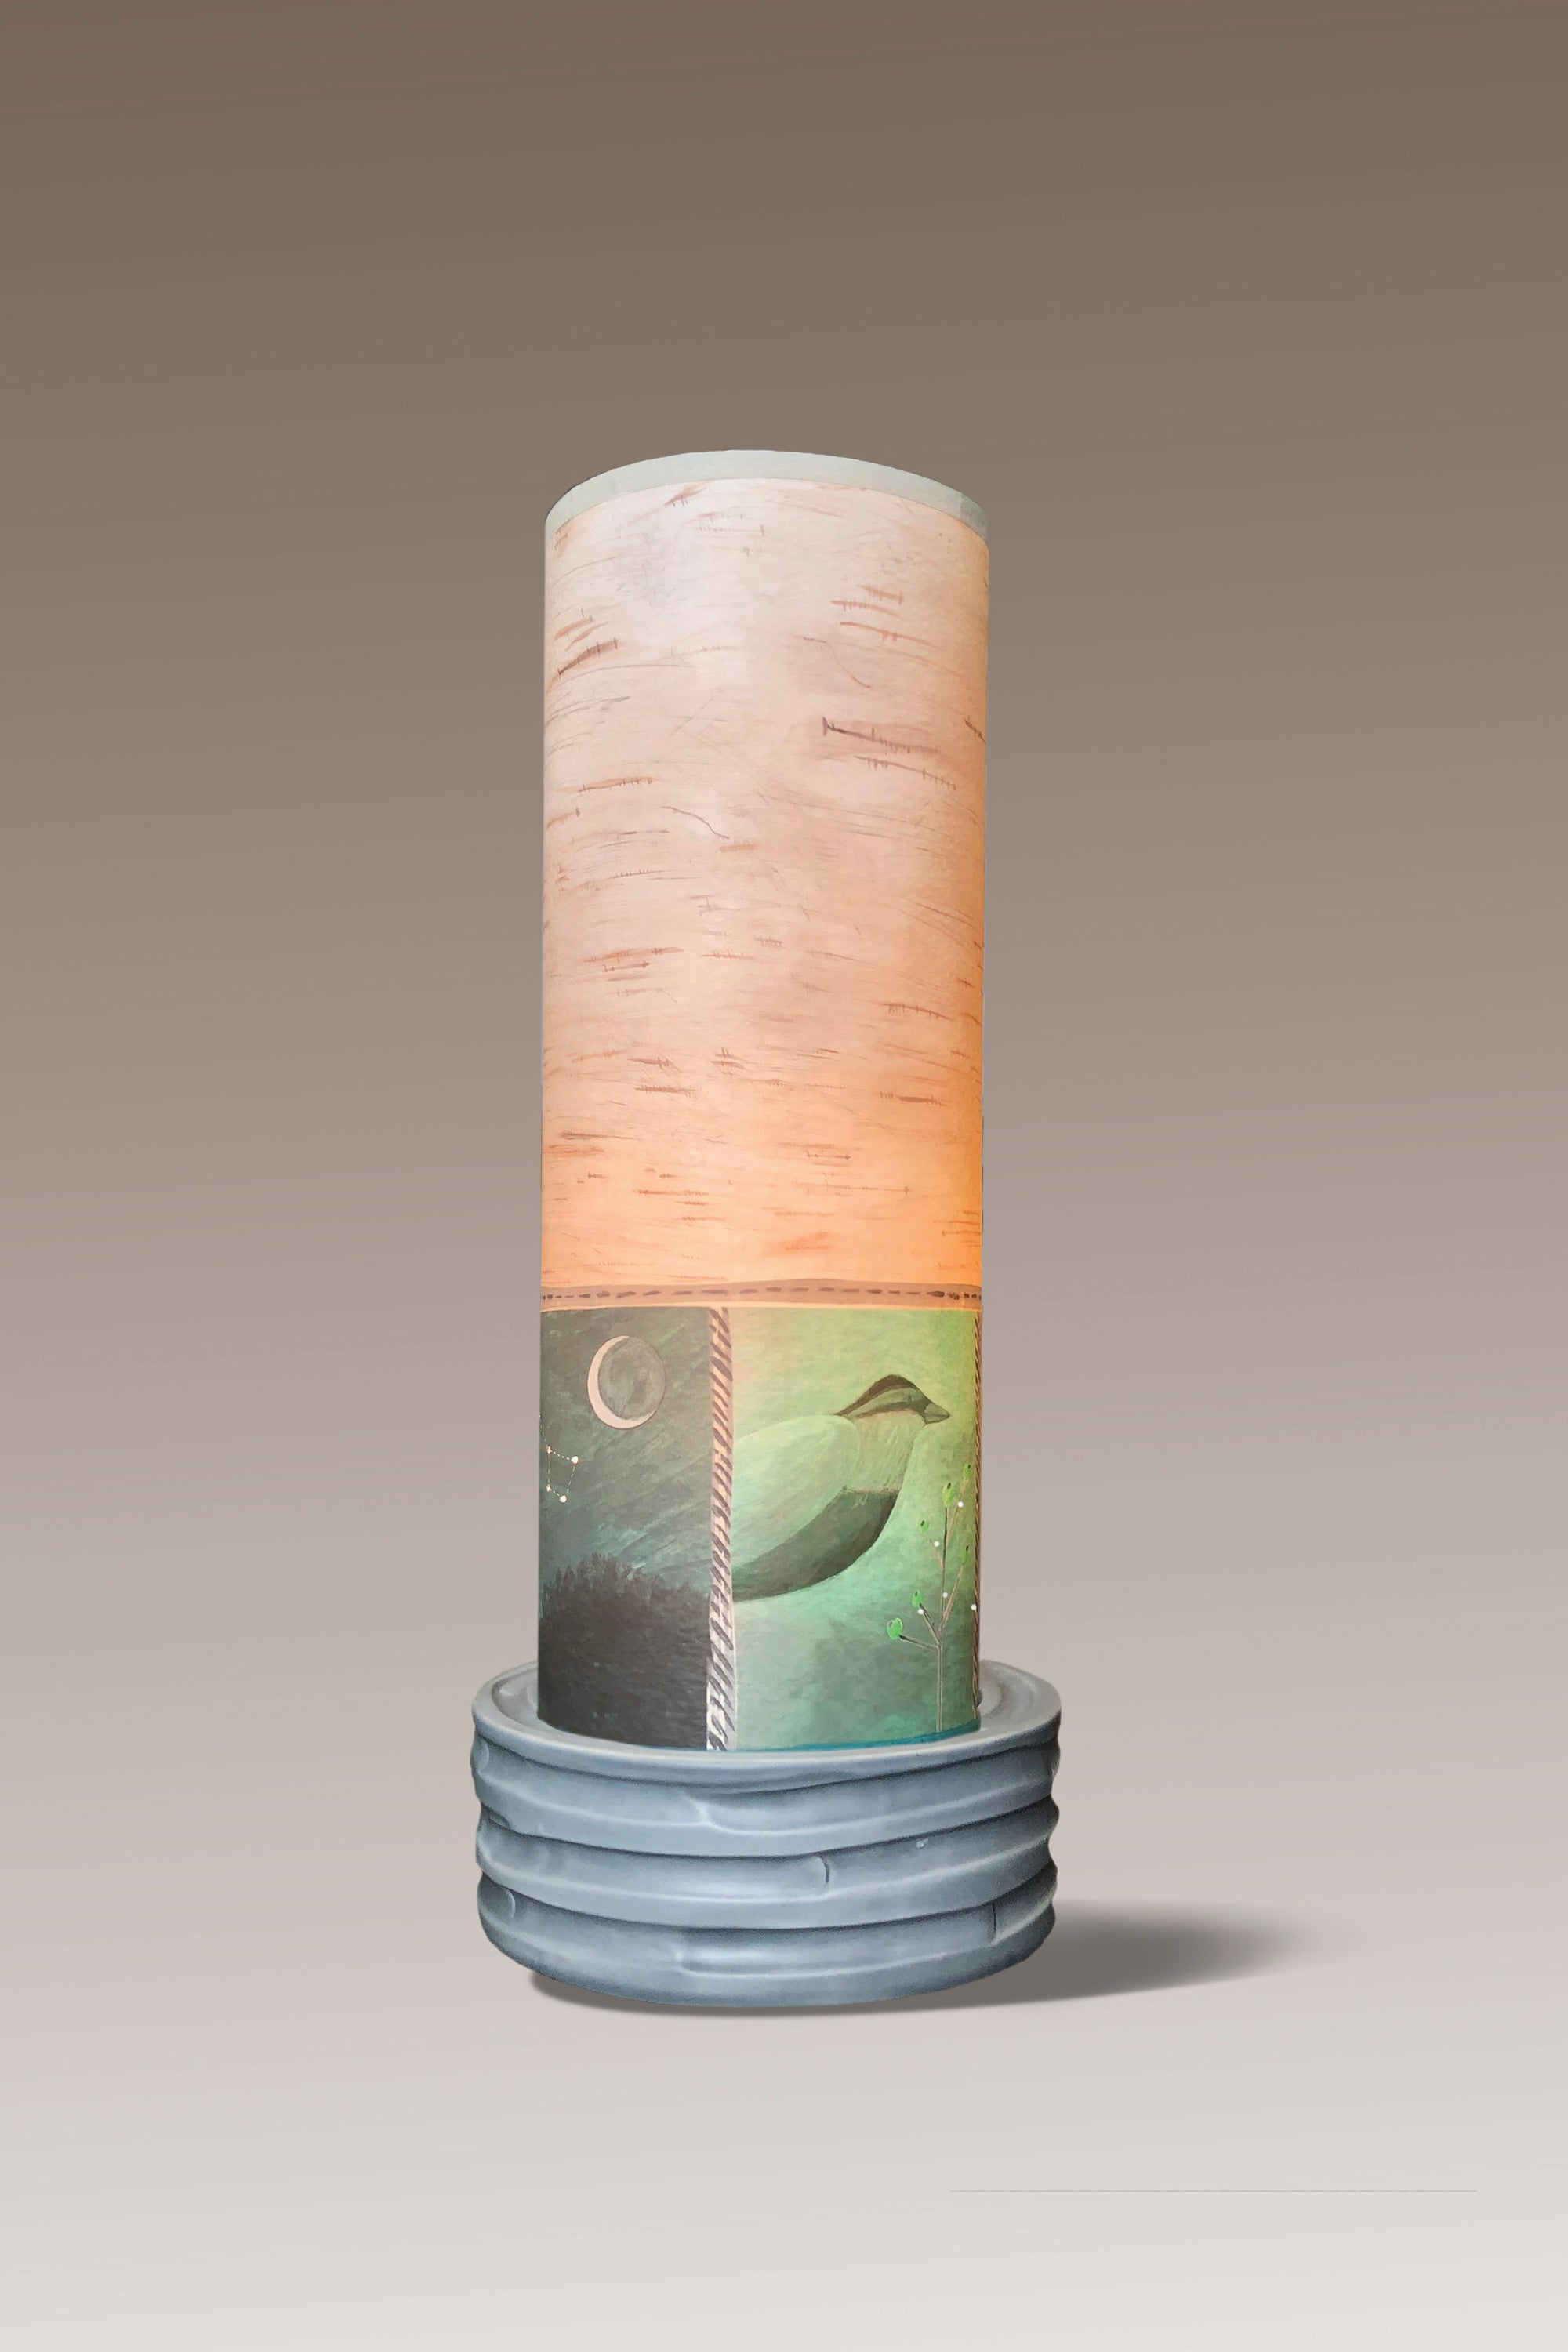 Janna Ugone & Co Luminaires Ceramic Luminaire Accent Lamp with Woodland Trails in Birch Shade